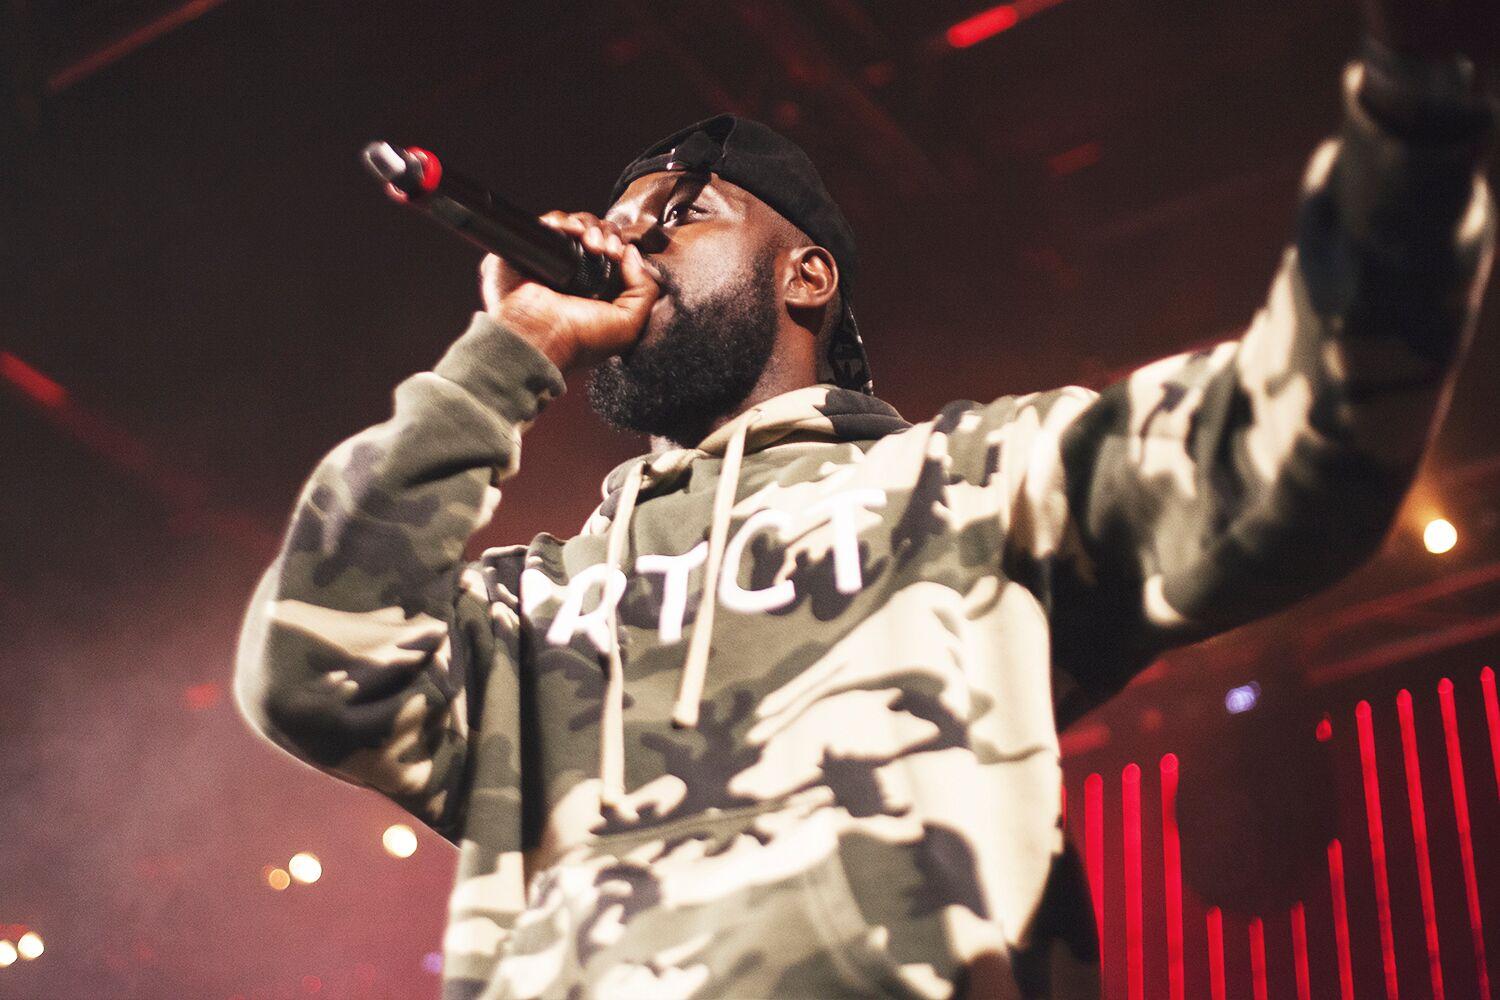 Ghetts performs at the Old Market